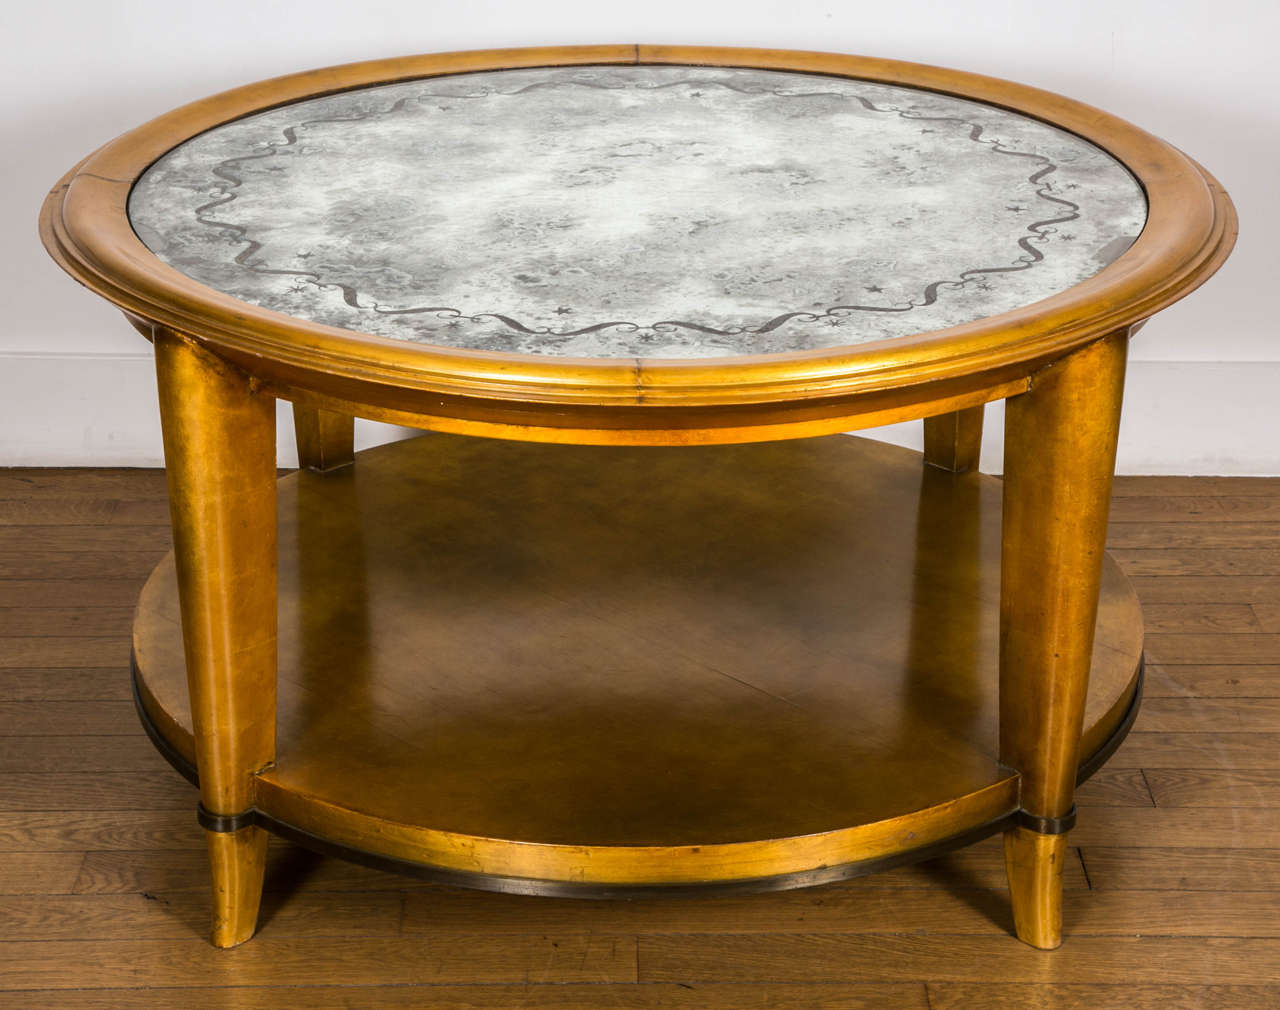 Important gilt lacquered circular wood coffee table, 1938, by A. Arbus (1903-1969) and Max Ingrand (1908-1969).
With gilt lacquered wood structure on four saber feet, together with a bronze belt underneath. Eglomized glass top with engraved